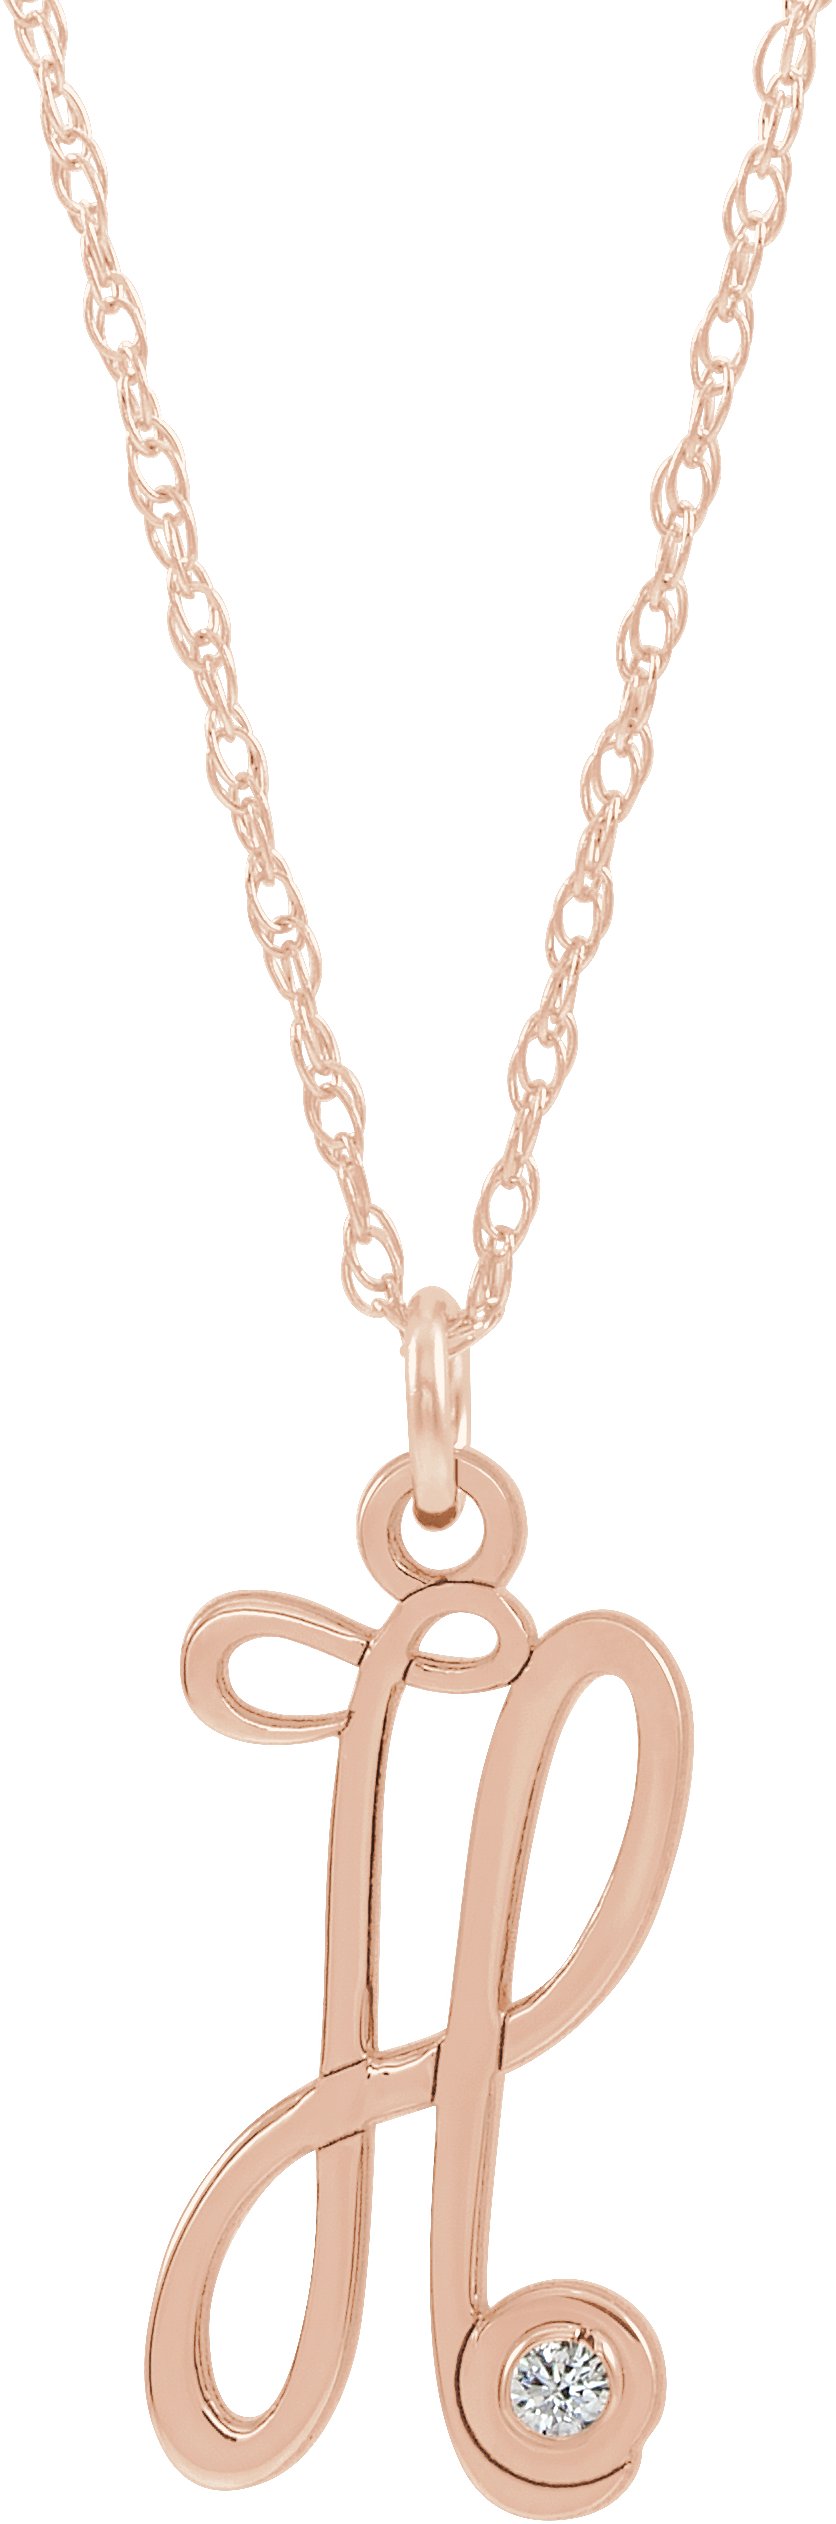 14K Rose Gold-Plated Sterling Silver .02 CT Diamond Script Initial H 16-18" Necklace